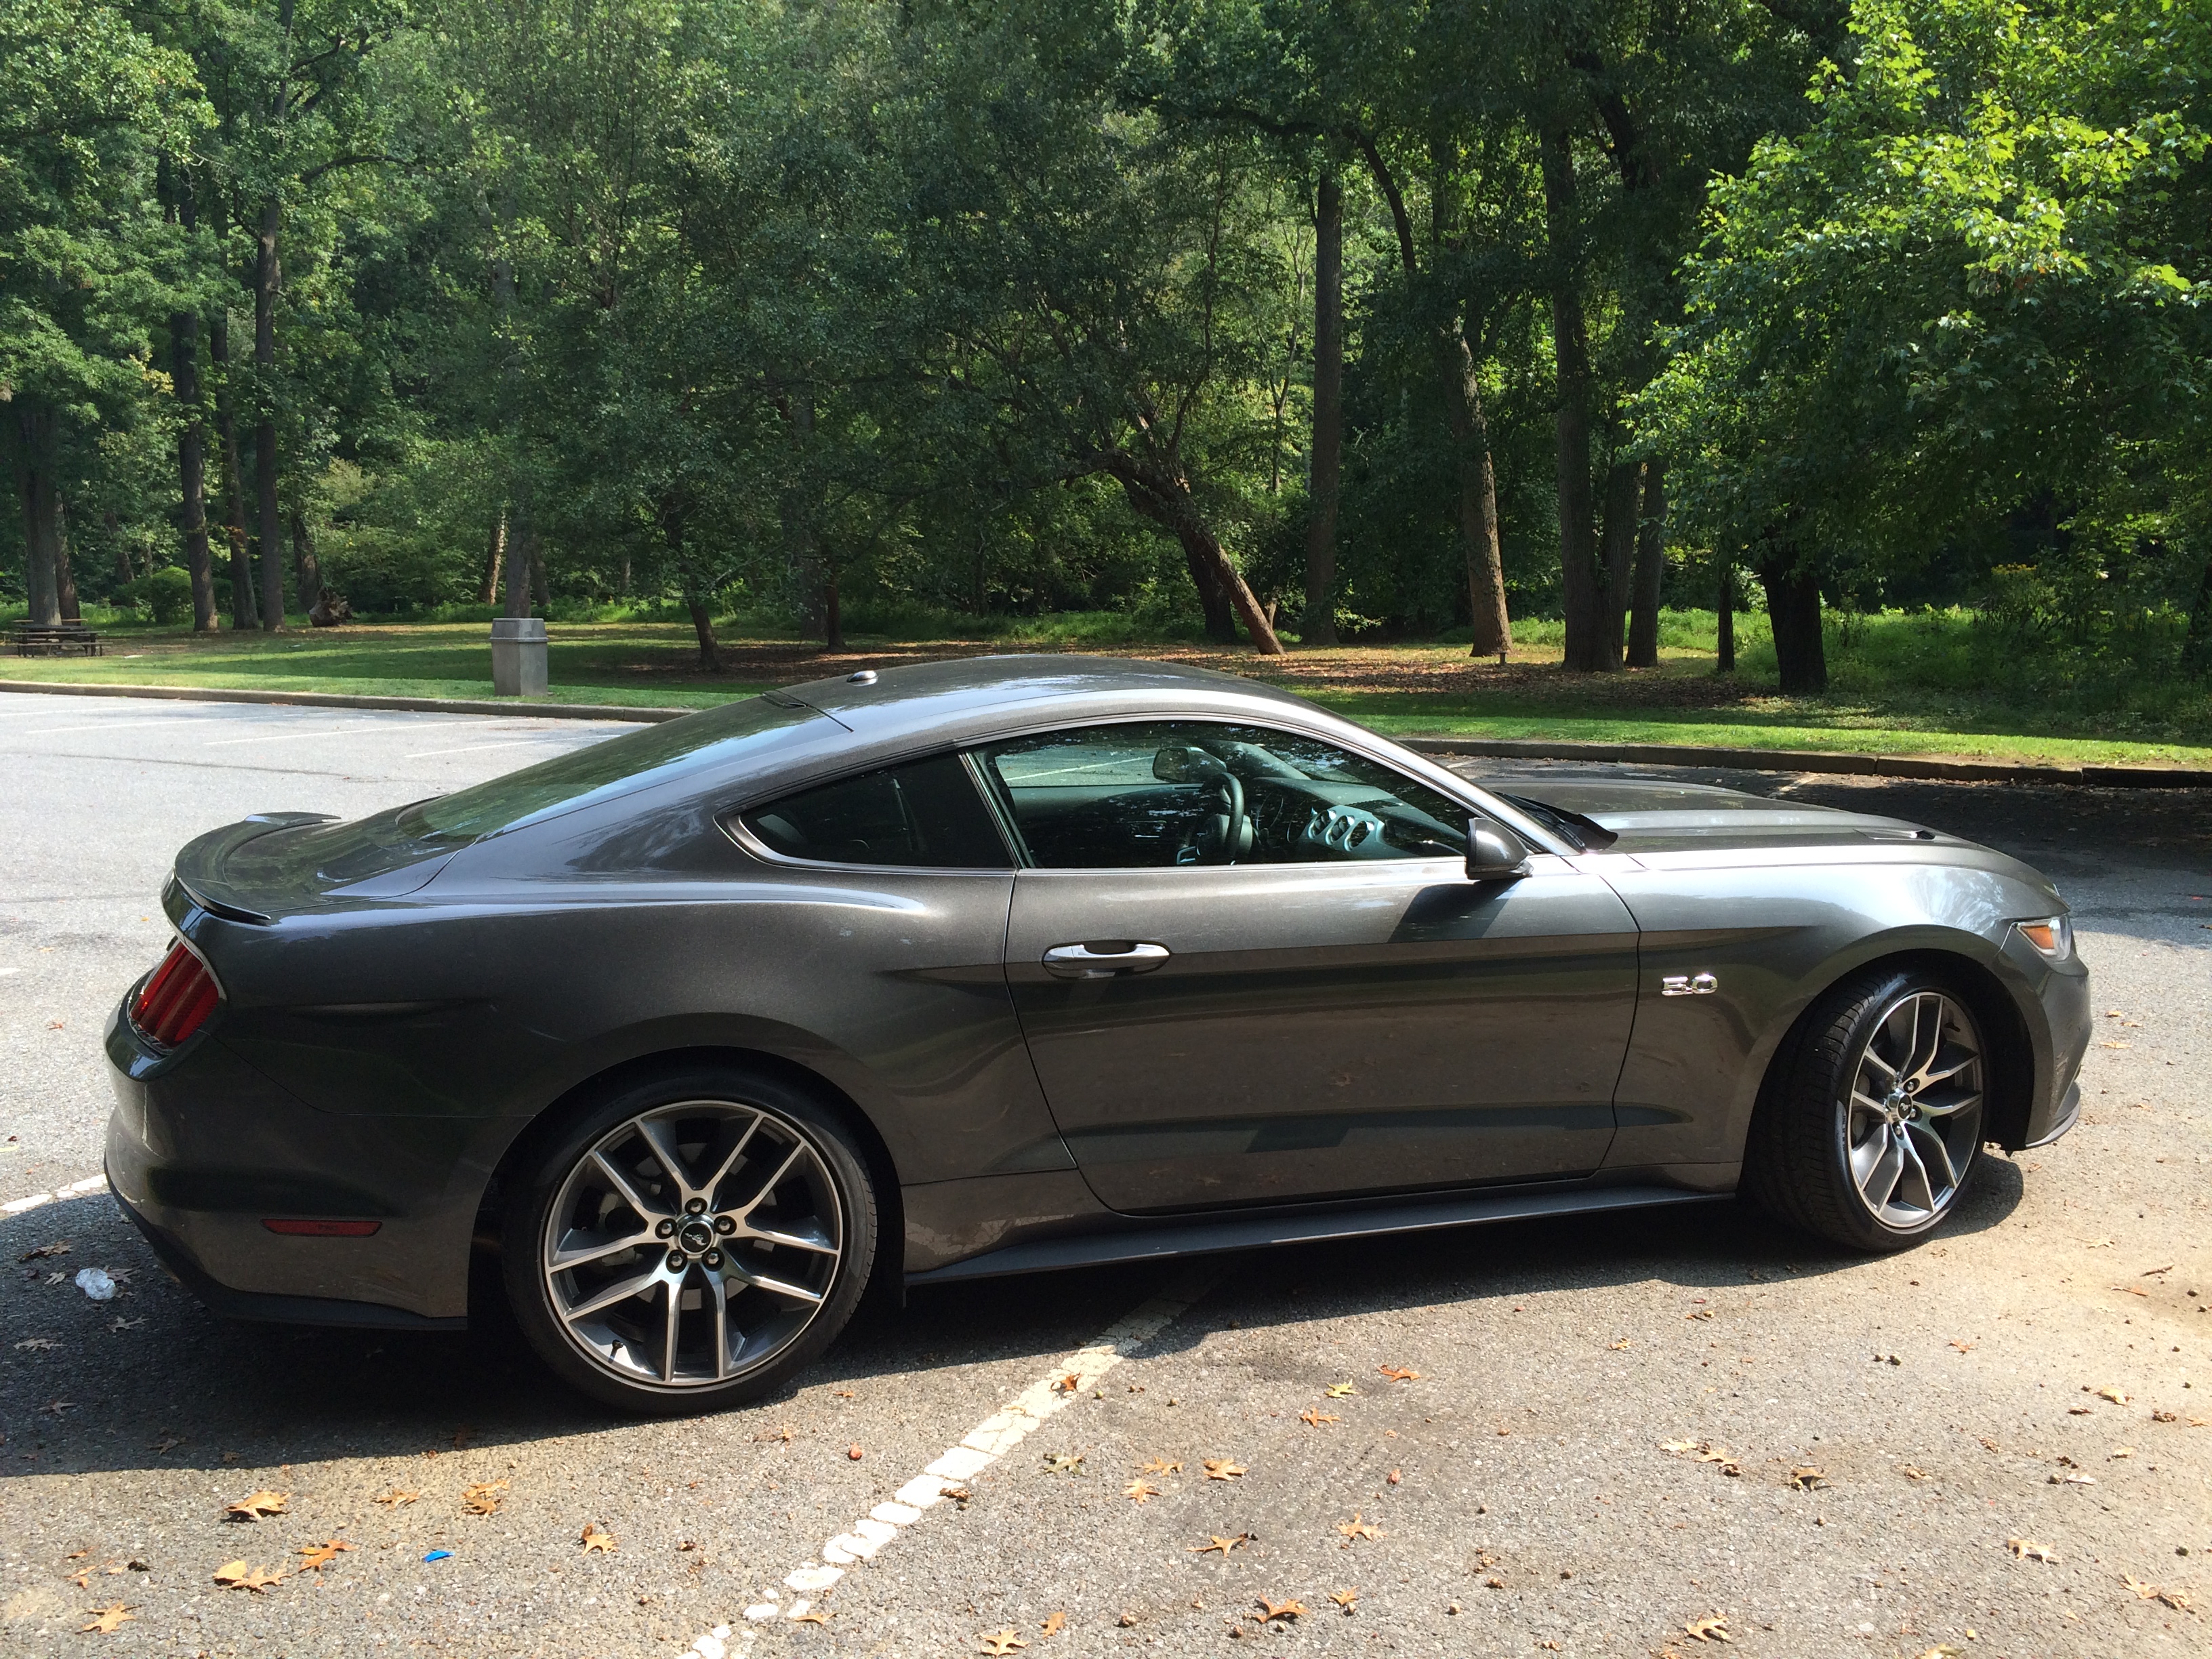 Car Report: The 2015 Mustang GT goes to finishing school, comes out a sophisticated pony